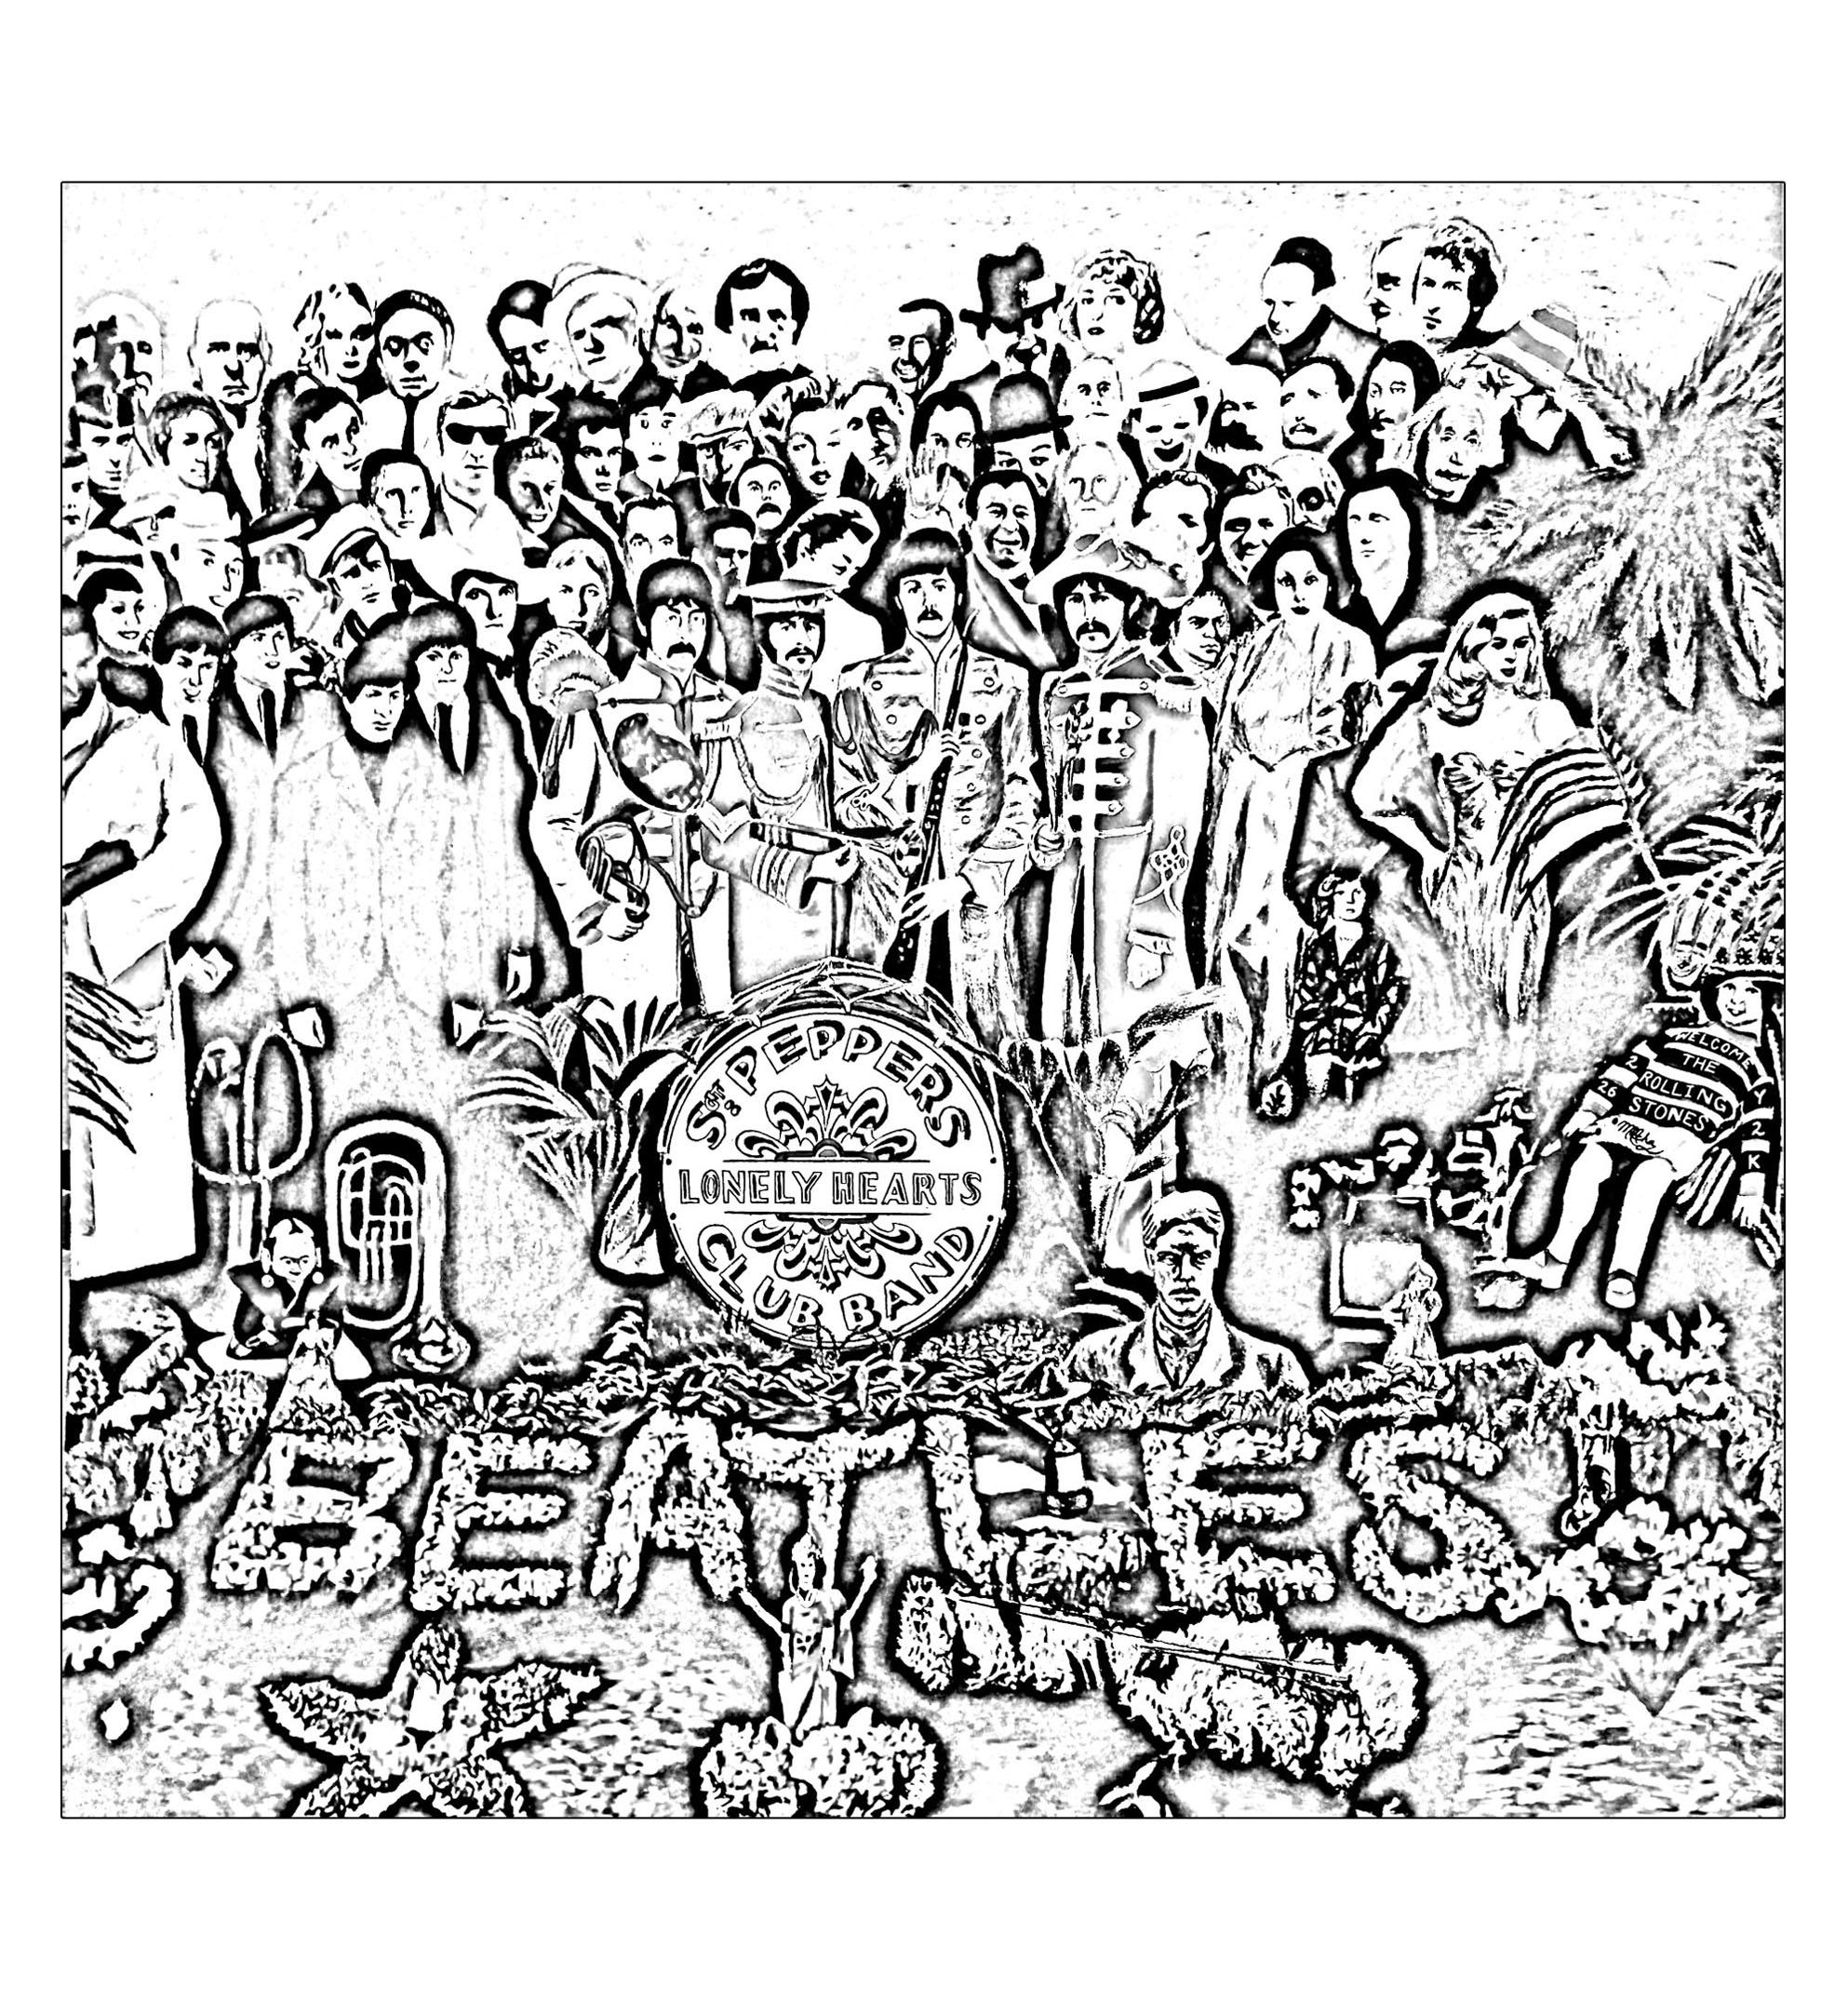 The beatles sgt peppers lonely hearts club band - Psychedelic Adult